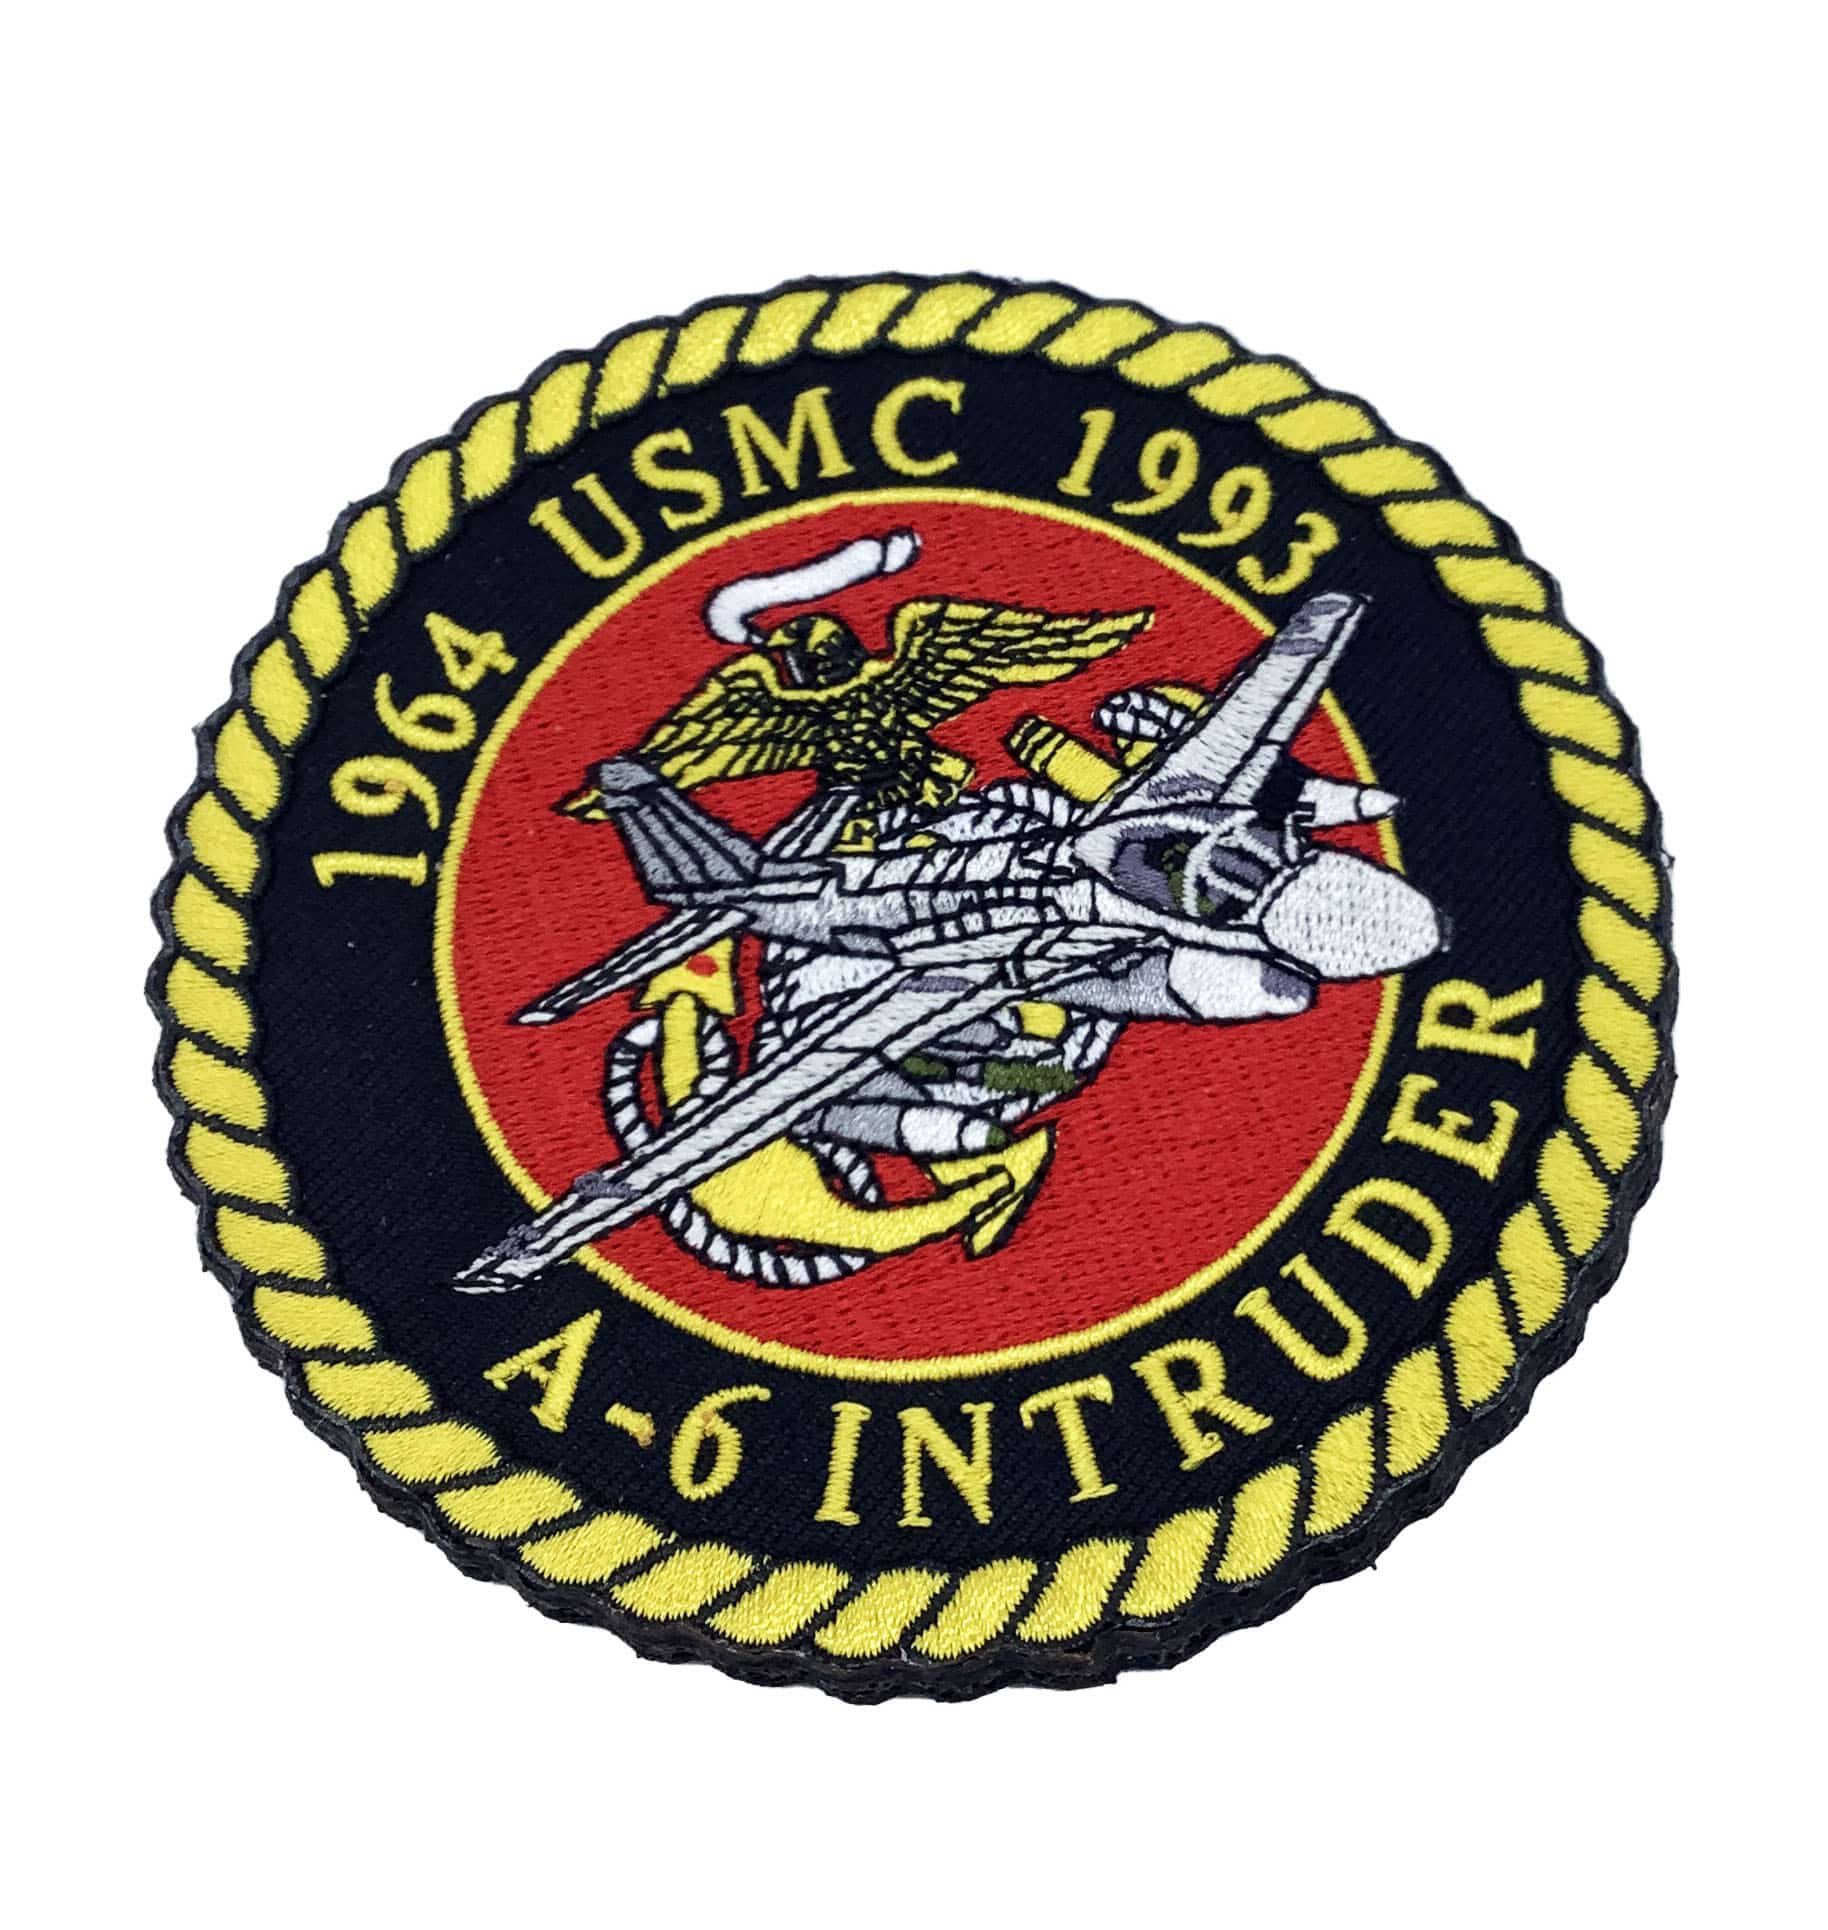 A-6 Intruder Commemorative Patch – With Hook and Loop